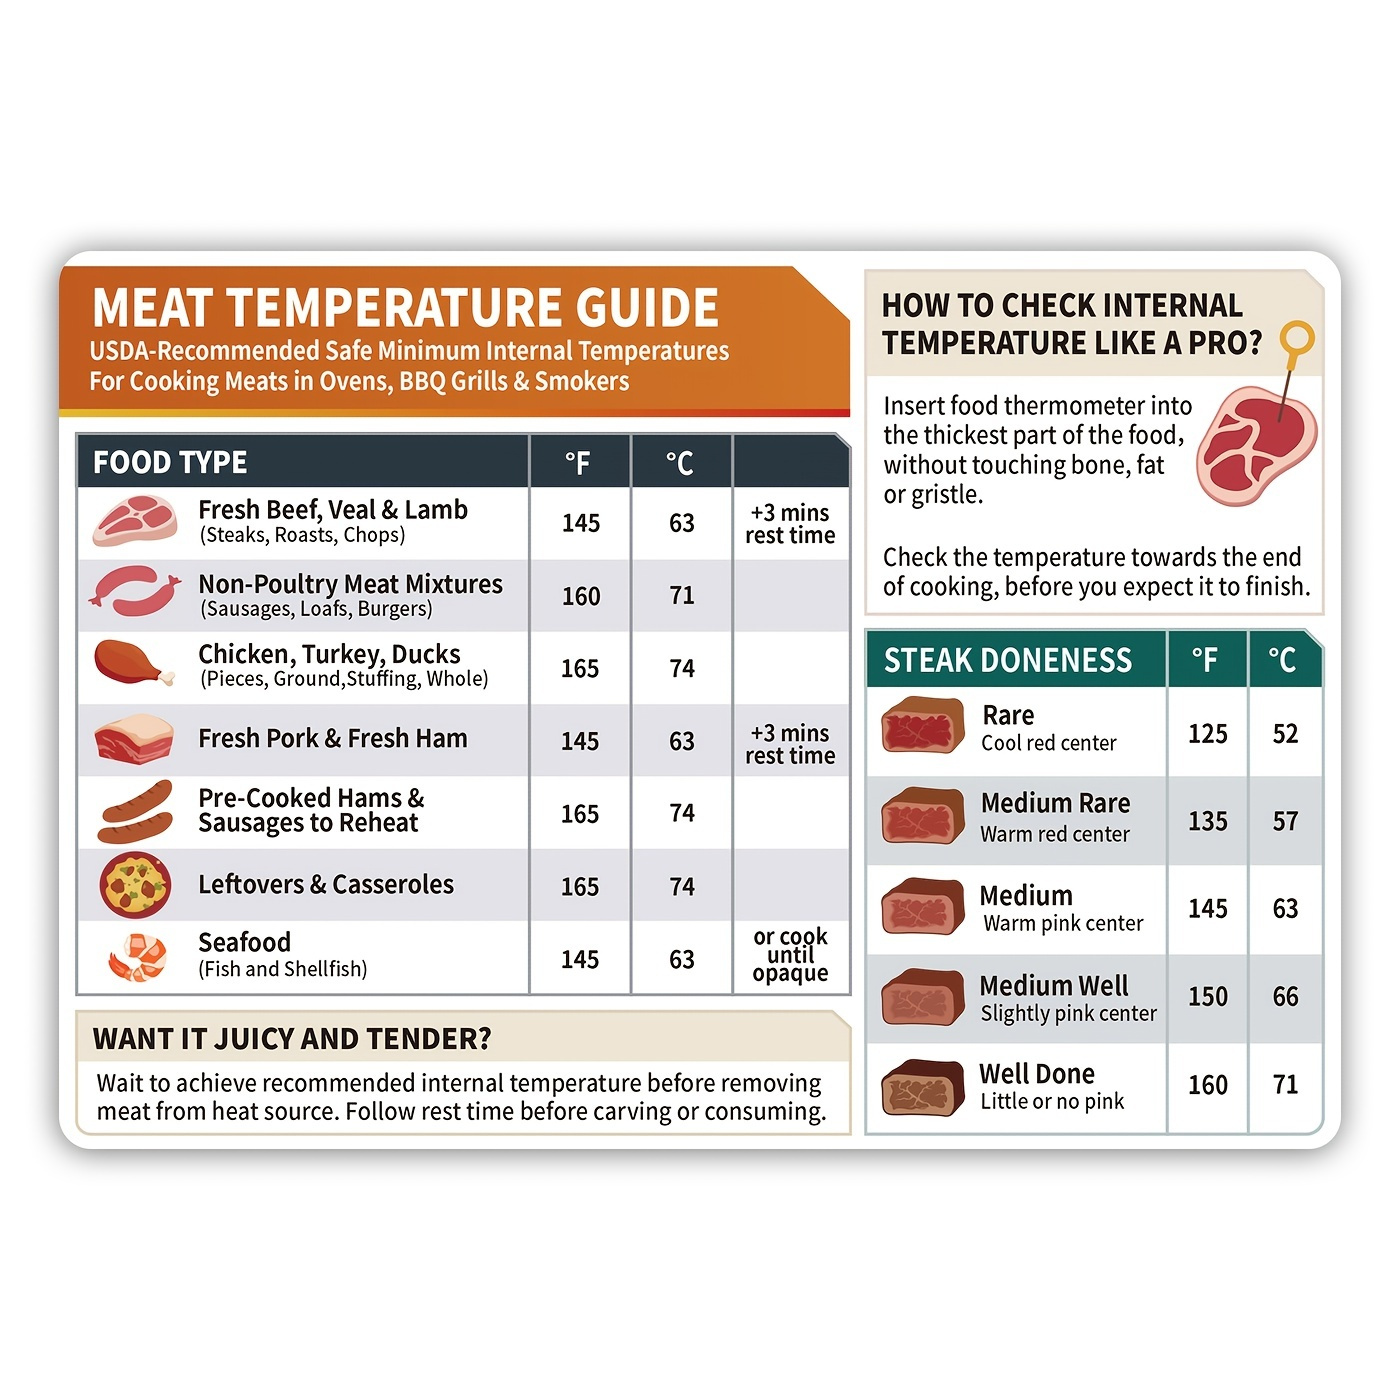 Internal Temperatures for Grilling Meat